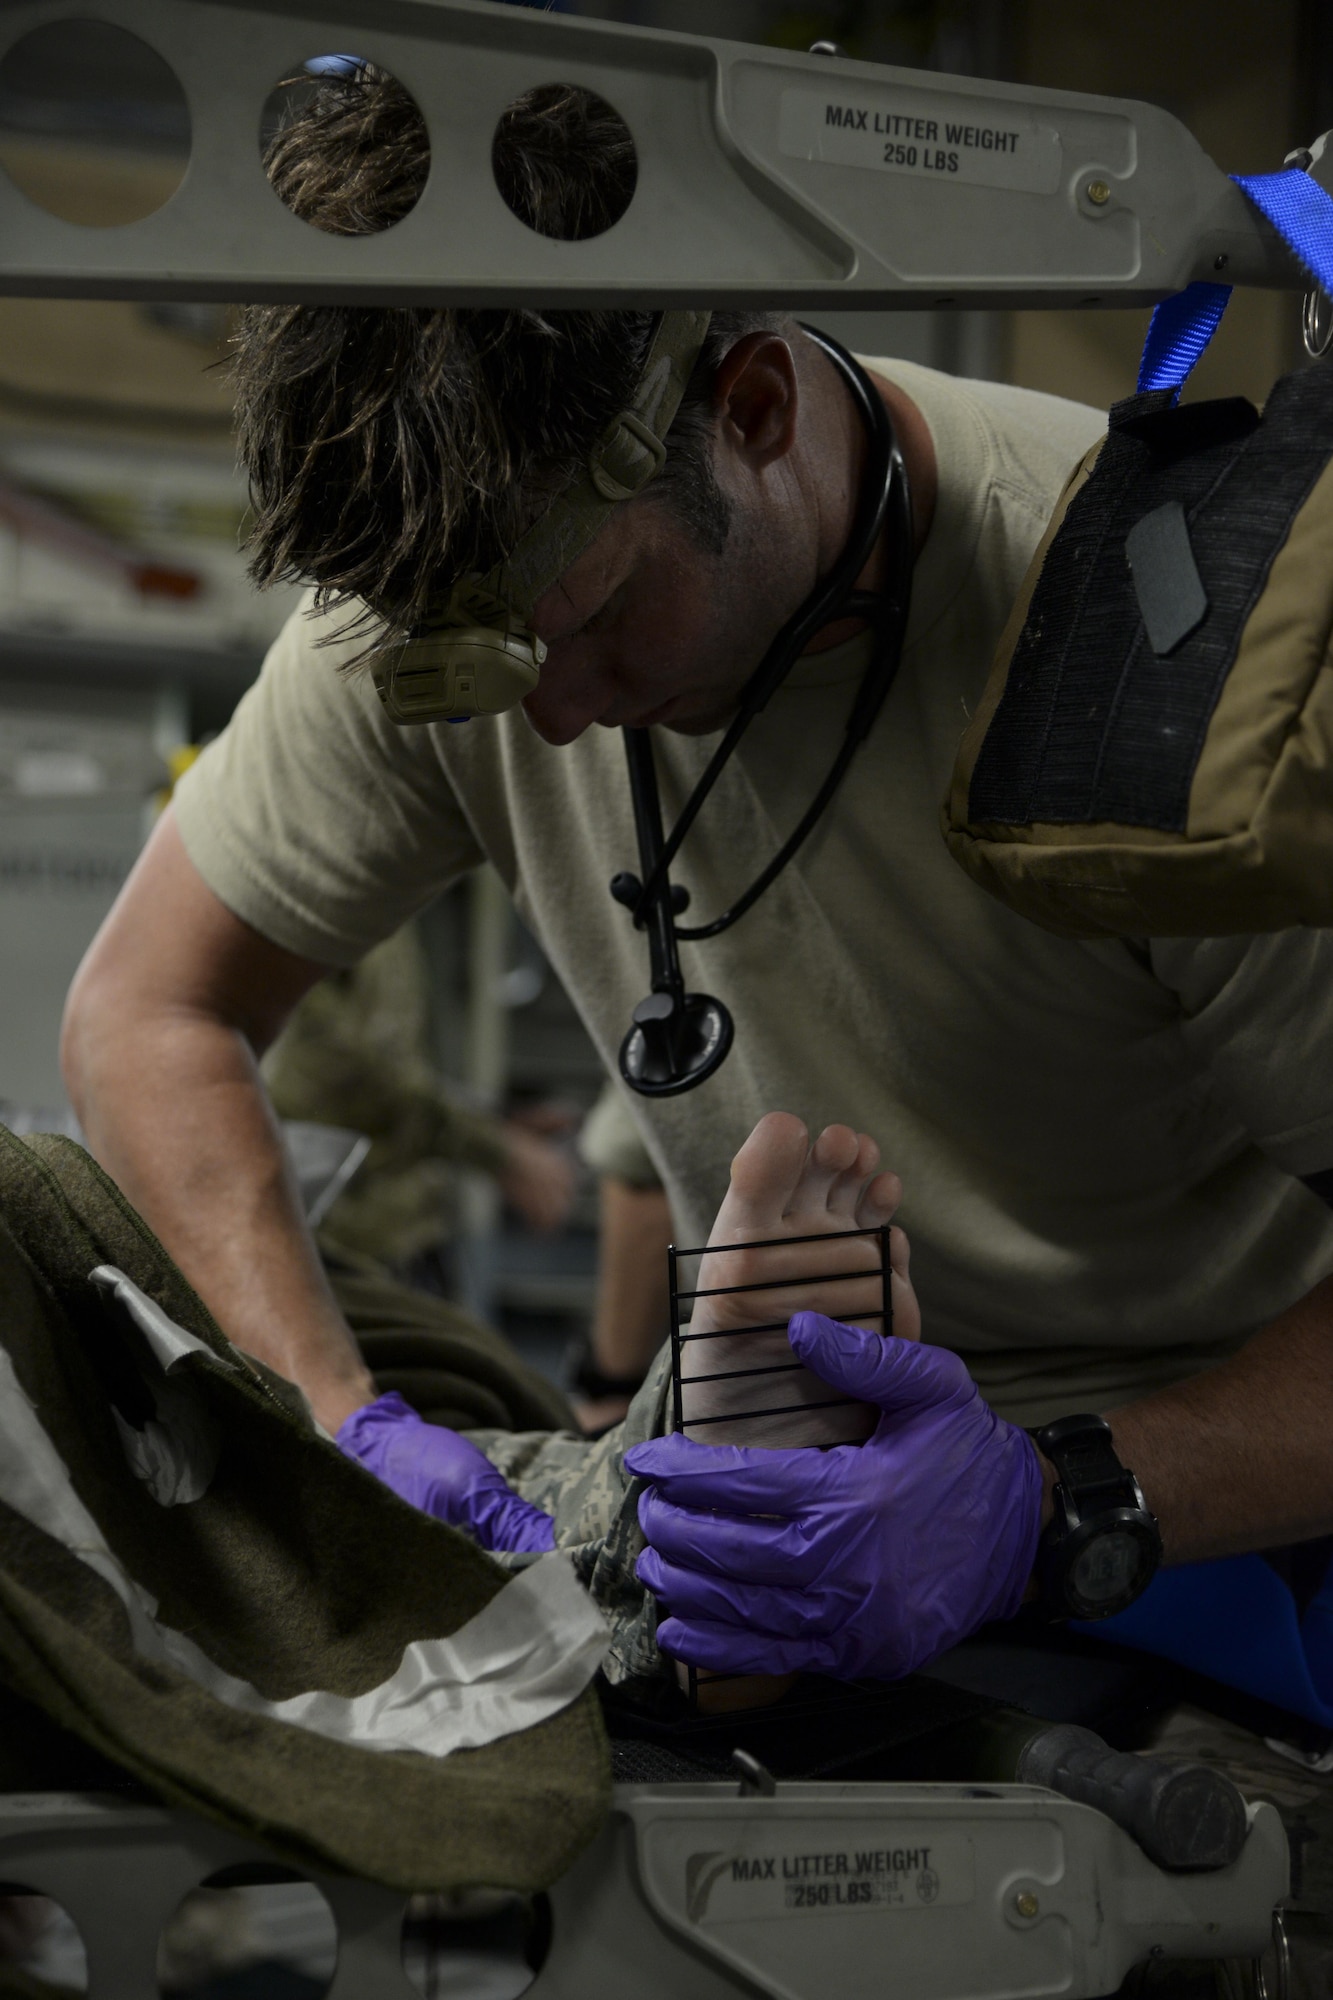 Staff Sgt. Travis Lester, 38th Rescue Squadron pararescueman assigned to Moody Air Force Base, Ga., fits a splint to a simulated injured leg May 17, 2017, during Exercise RAPID RESCUE aboard a 3d Airlift Squadron C-17 Globemaster III. The pararescuemen utilized several medical techniques to immobilize, sanitize and control simulated injuries during the aeromedical evacuation. (U.S. Air Force photo by Senior Airman Aaron J. Jenne)